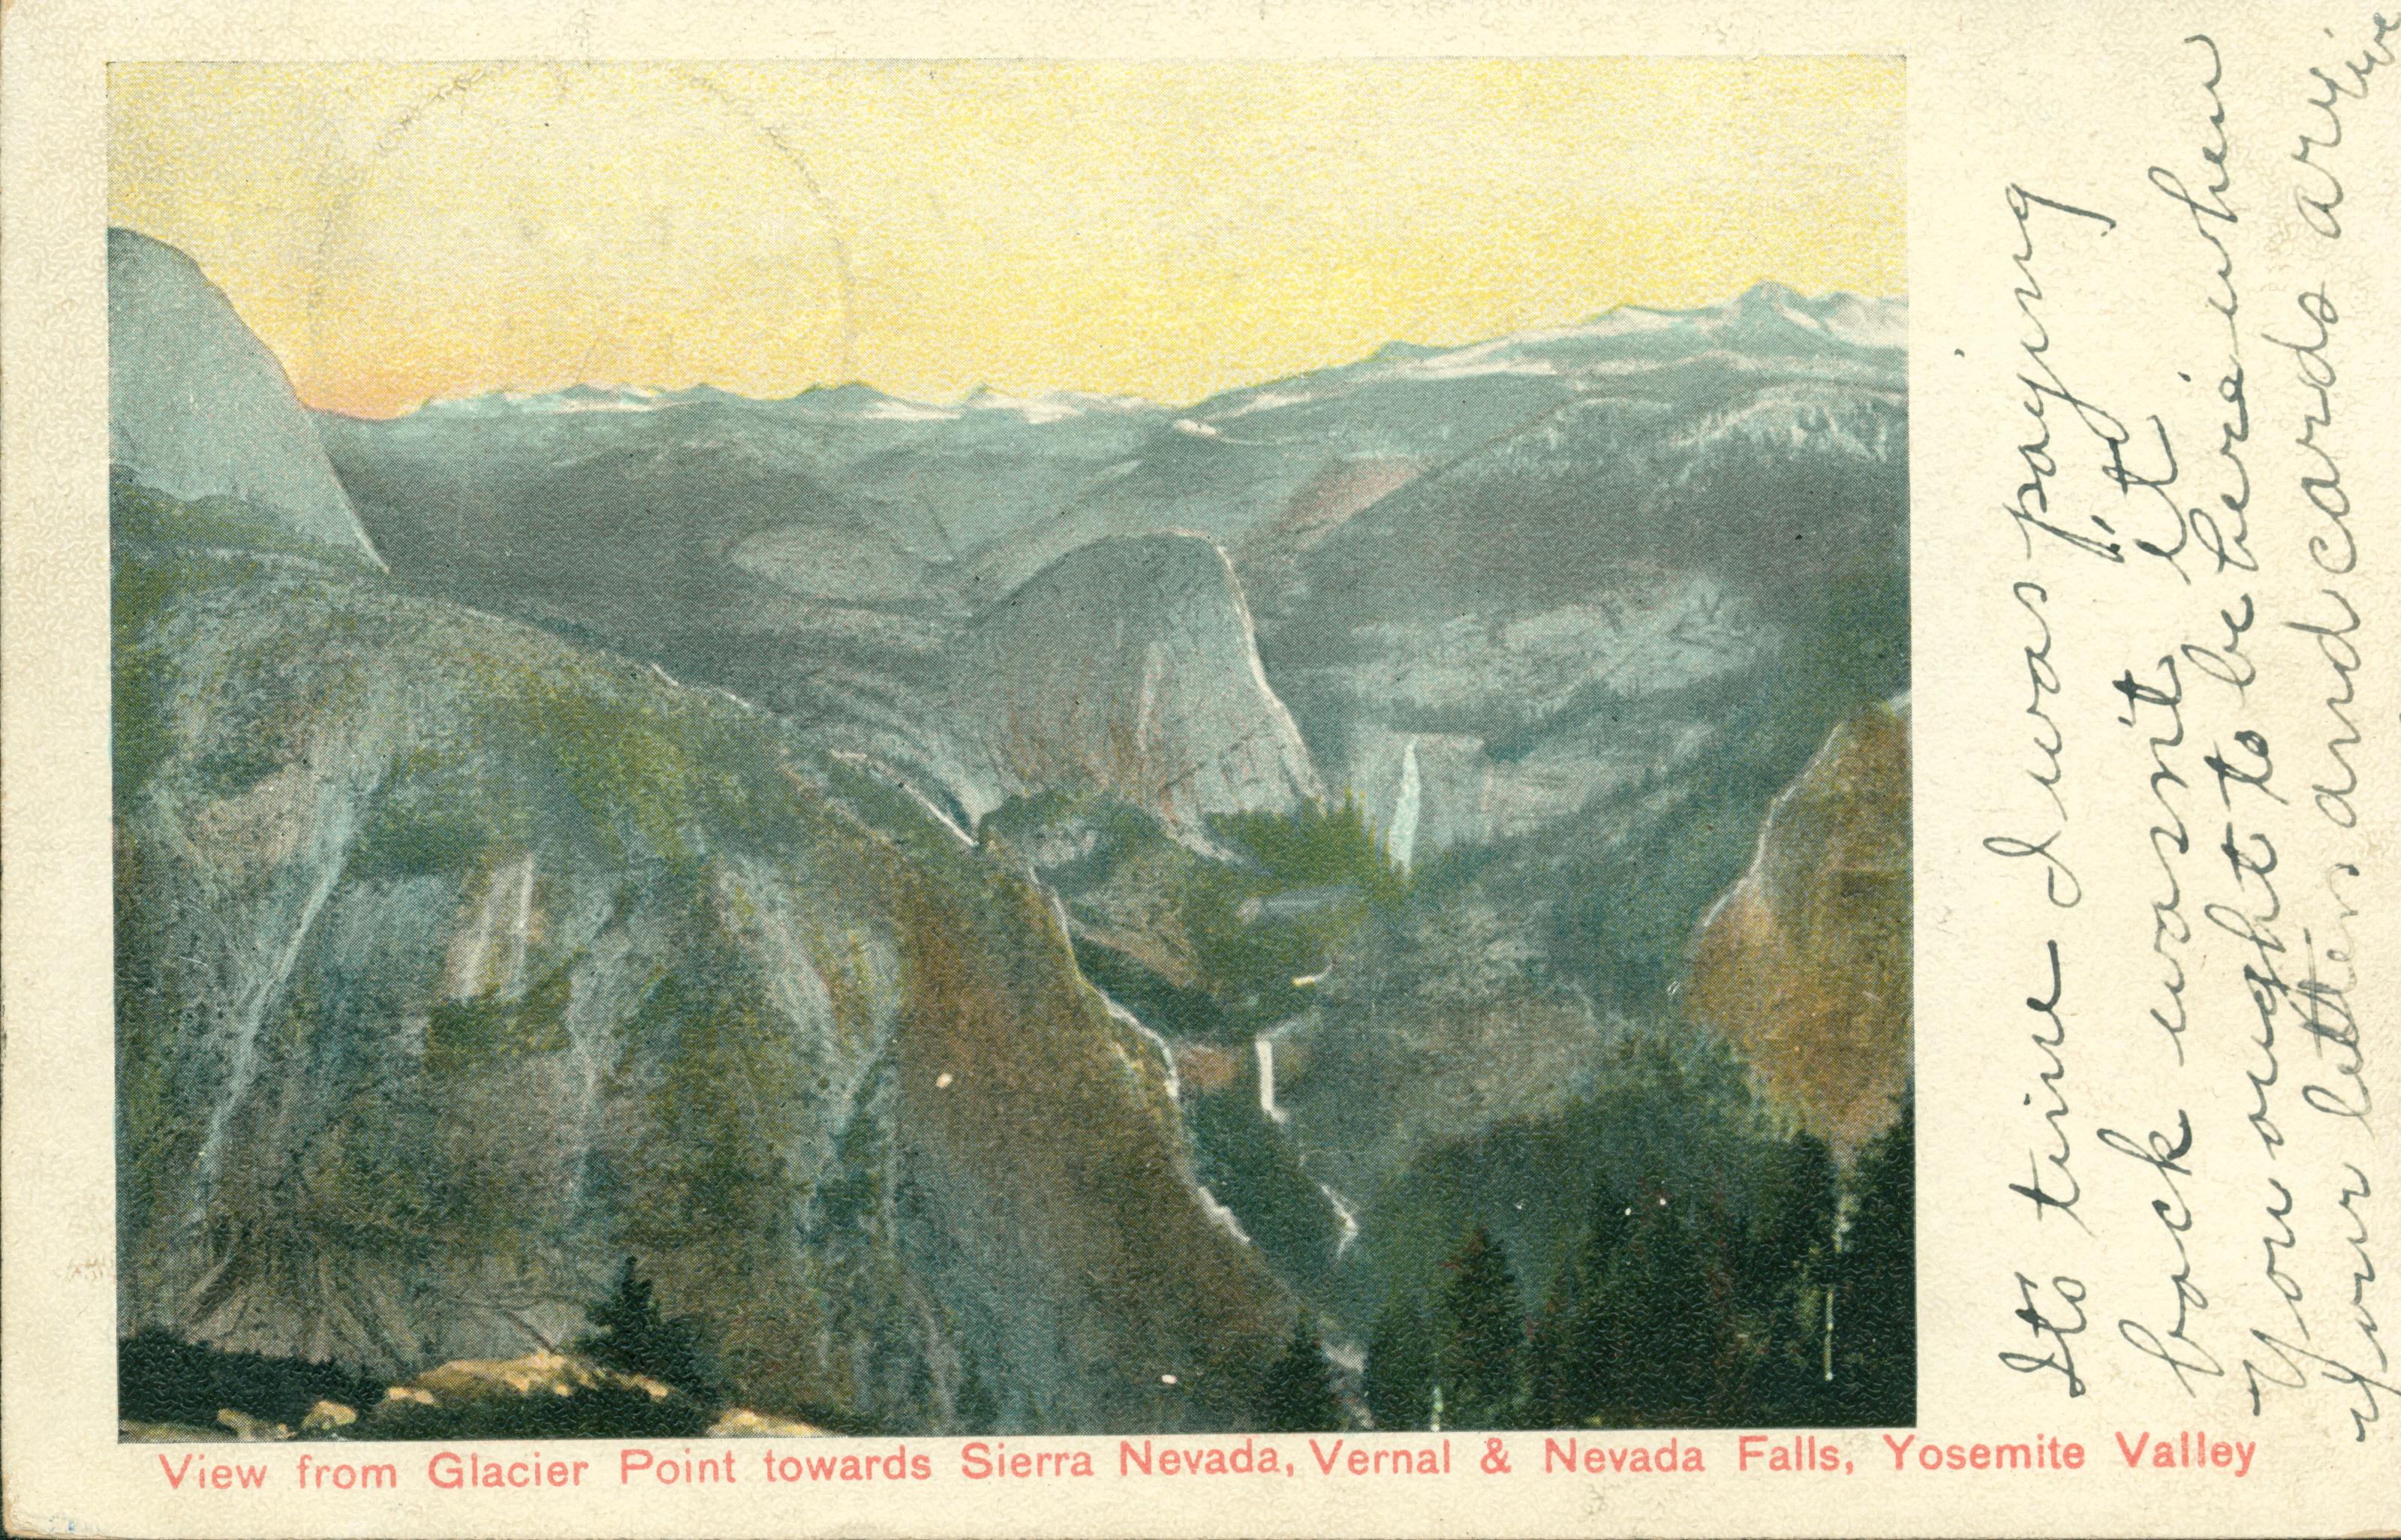 Shows a view of the Yosemite Valley, with waterfalls on the right